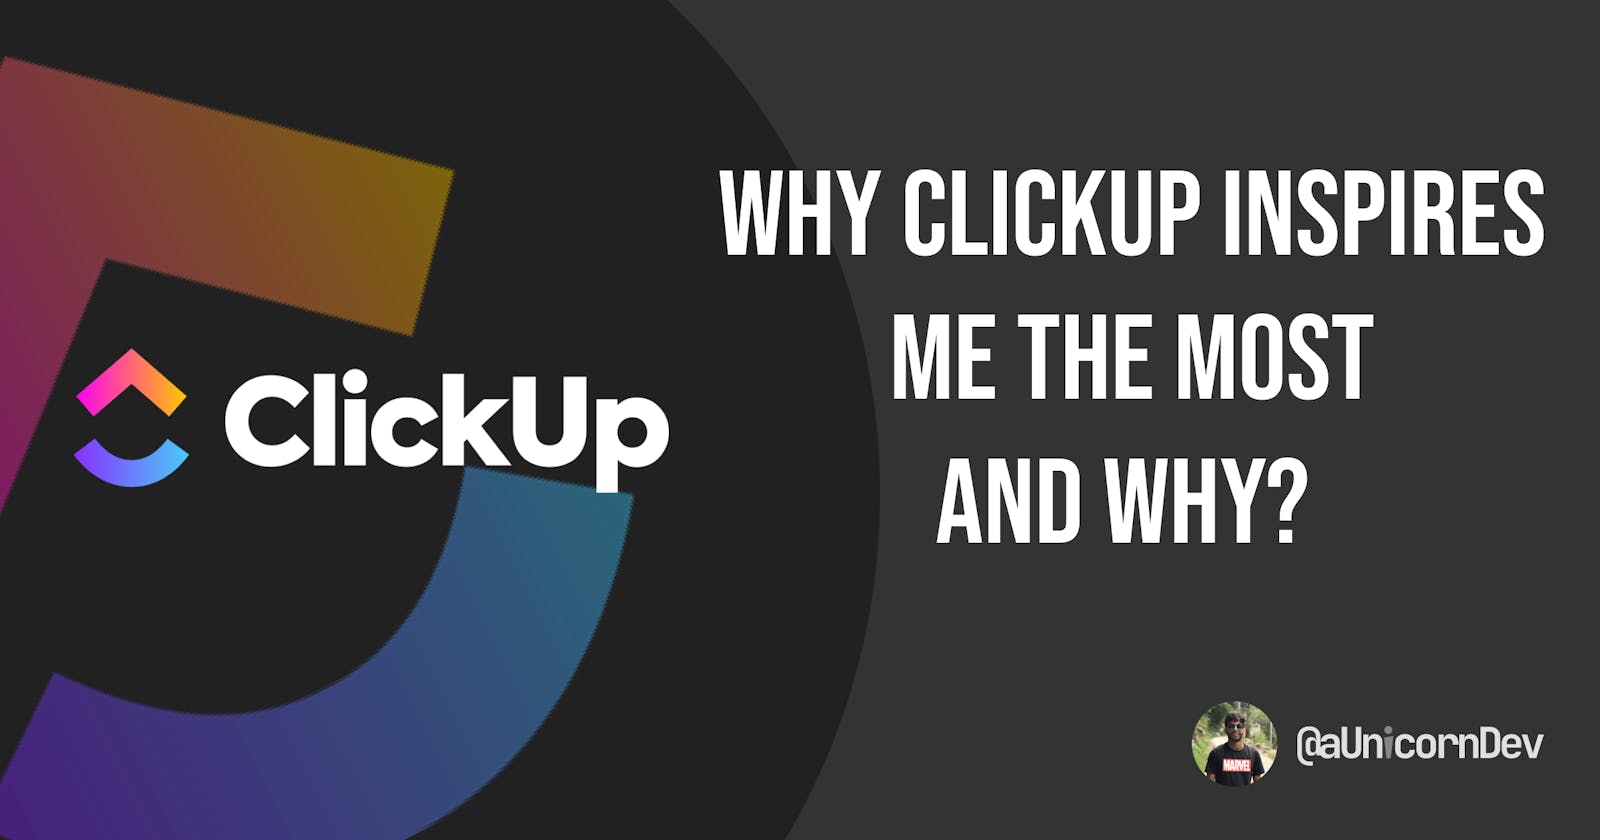 Why ClickUp inspires me the most and why?